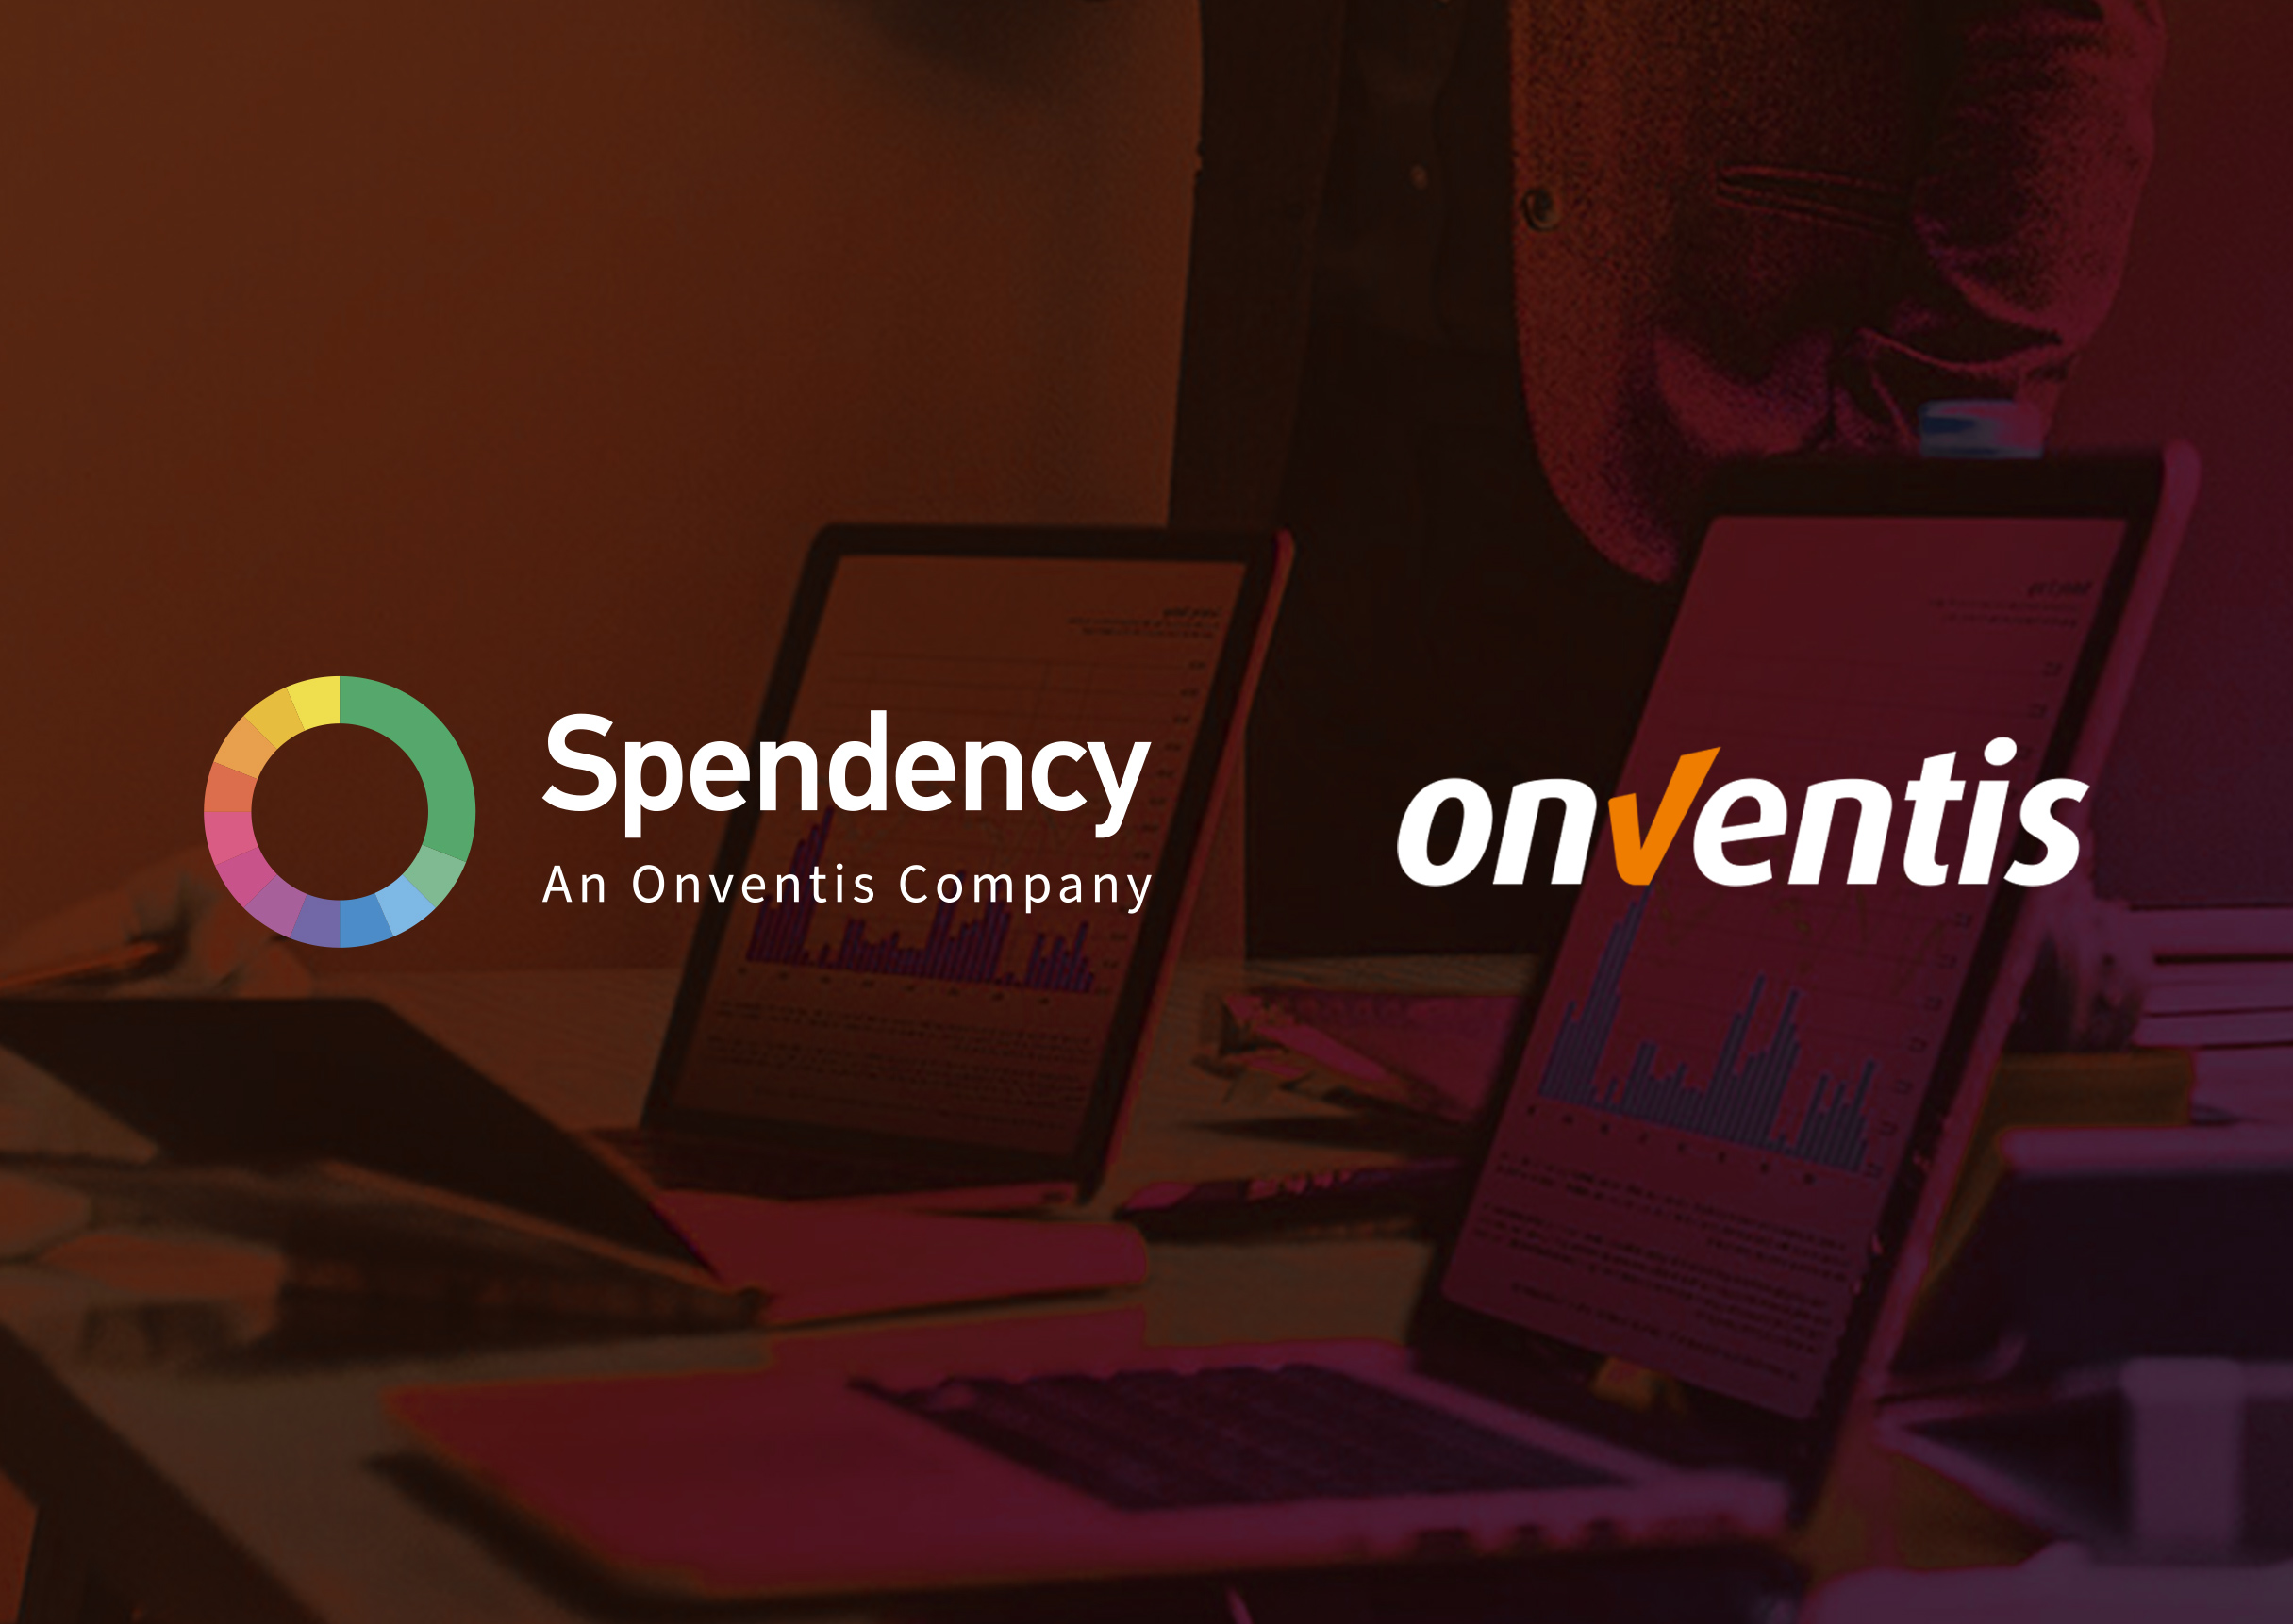 Onventis Spendency acquisition